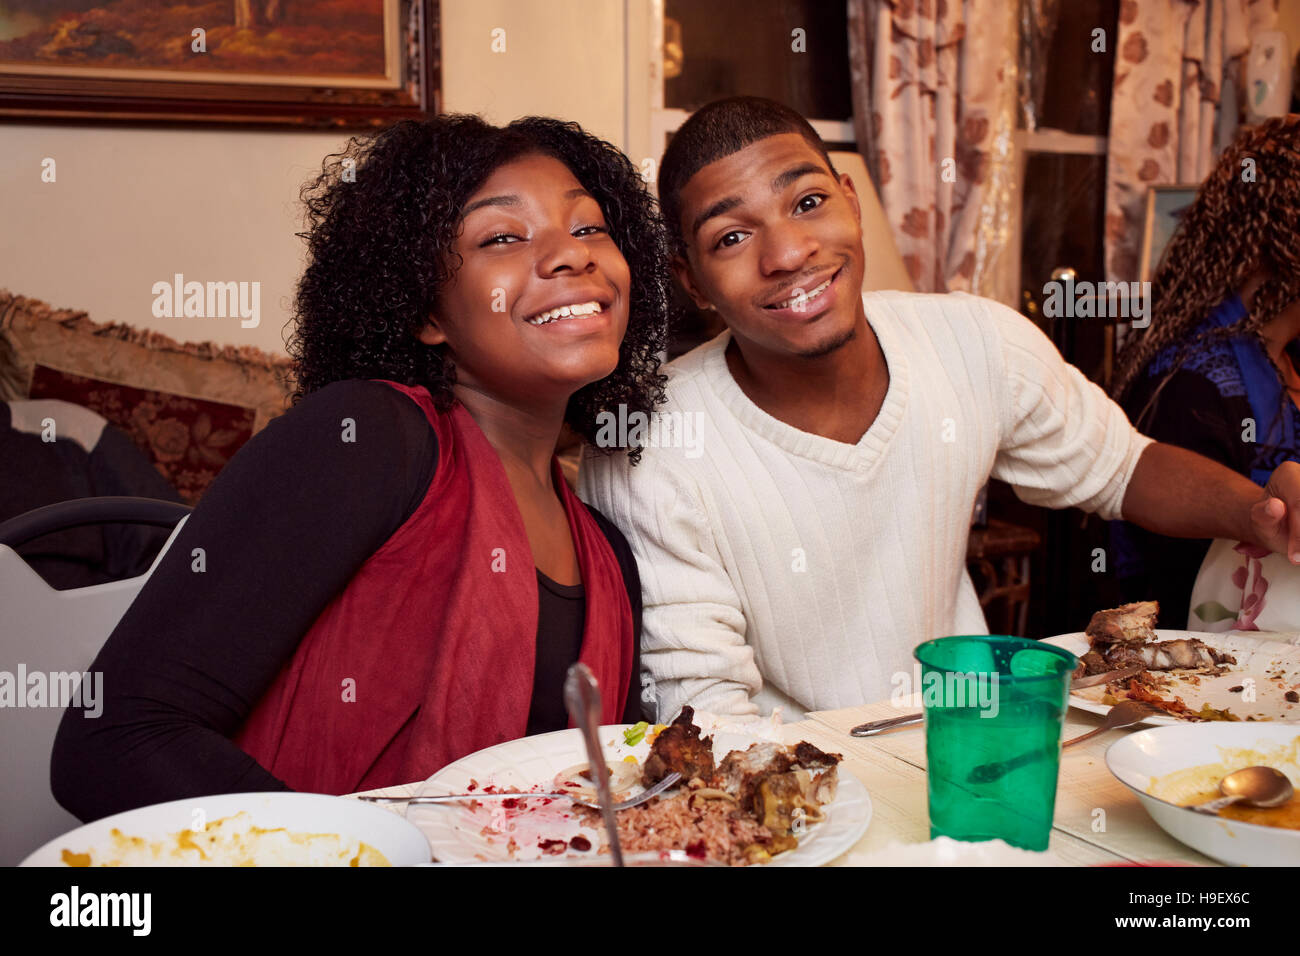 Smiling Black brother and sister at dinner table Stock Photo